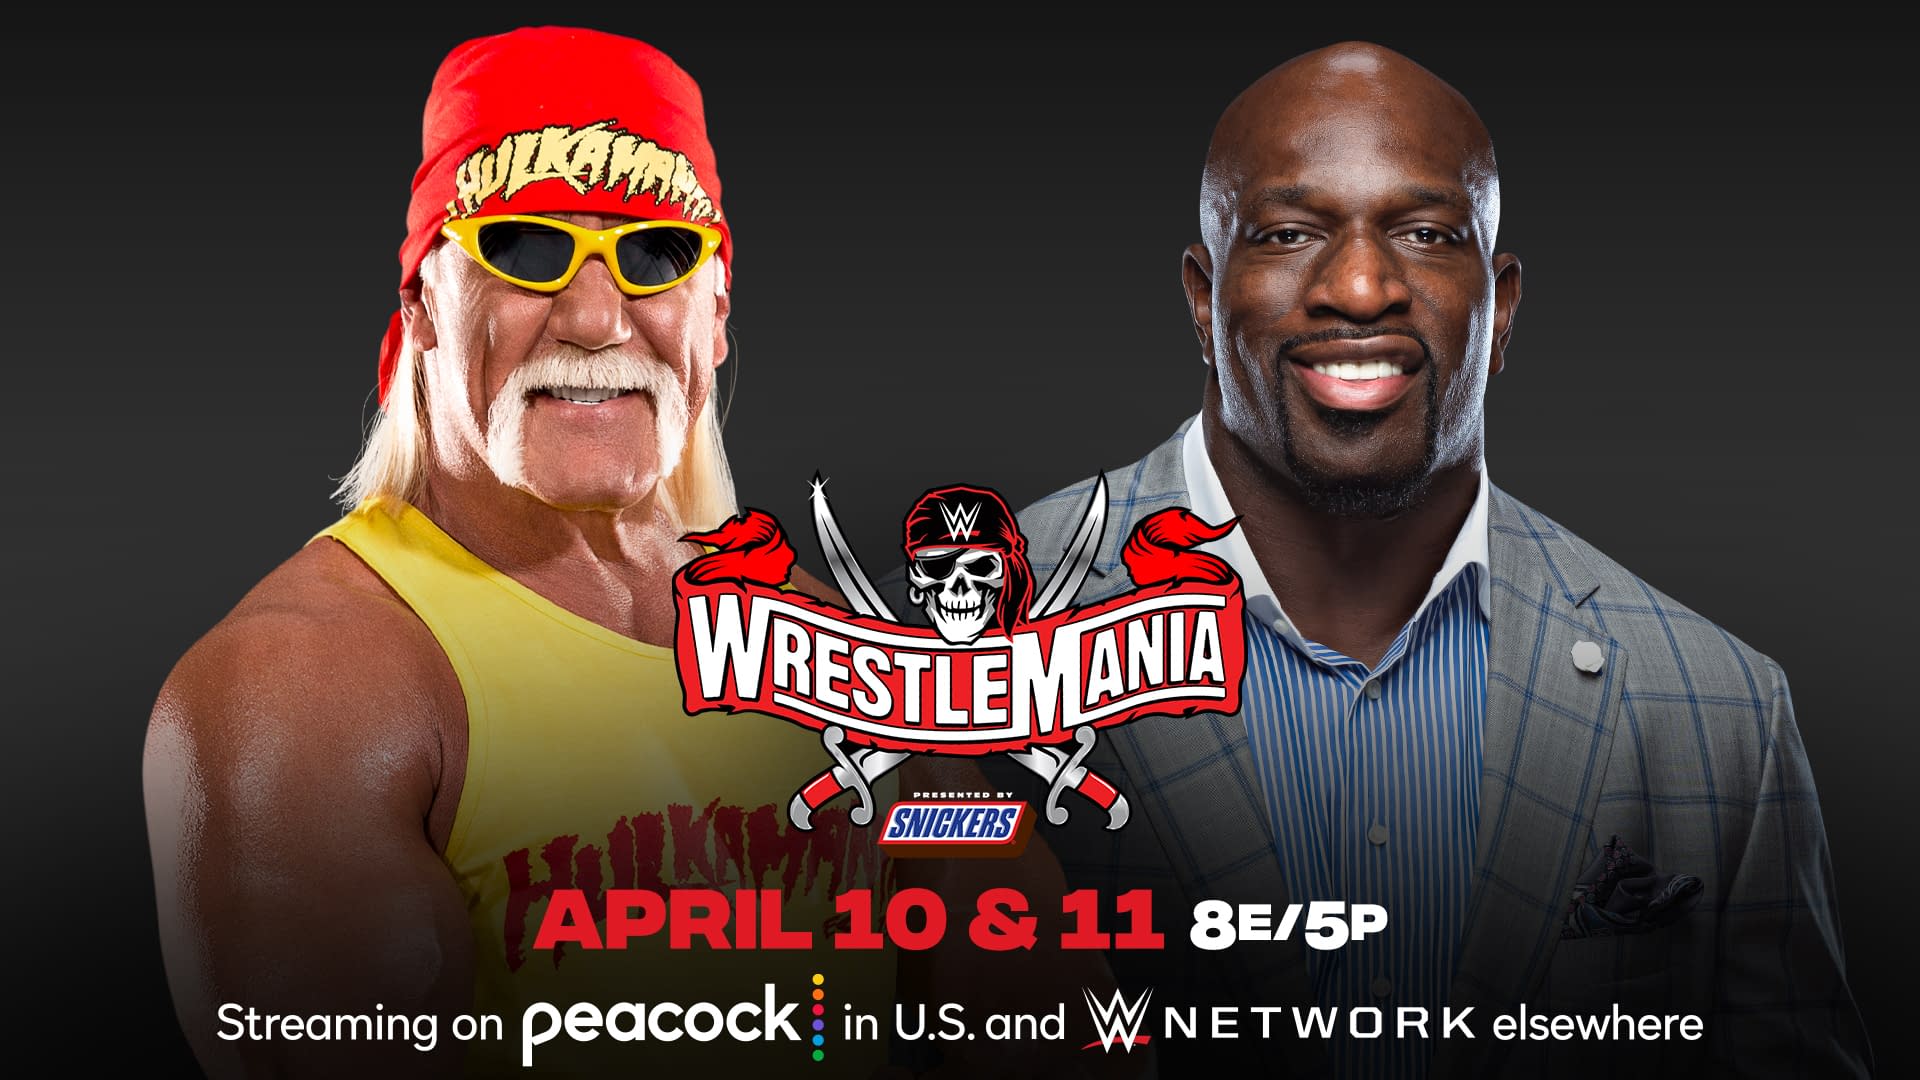 Hulk Hogan to Host WrestleMania to Help Others Learn From His Mistakes